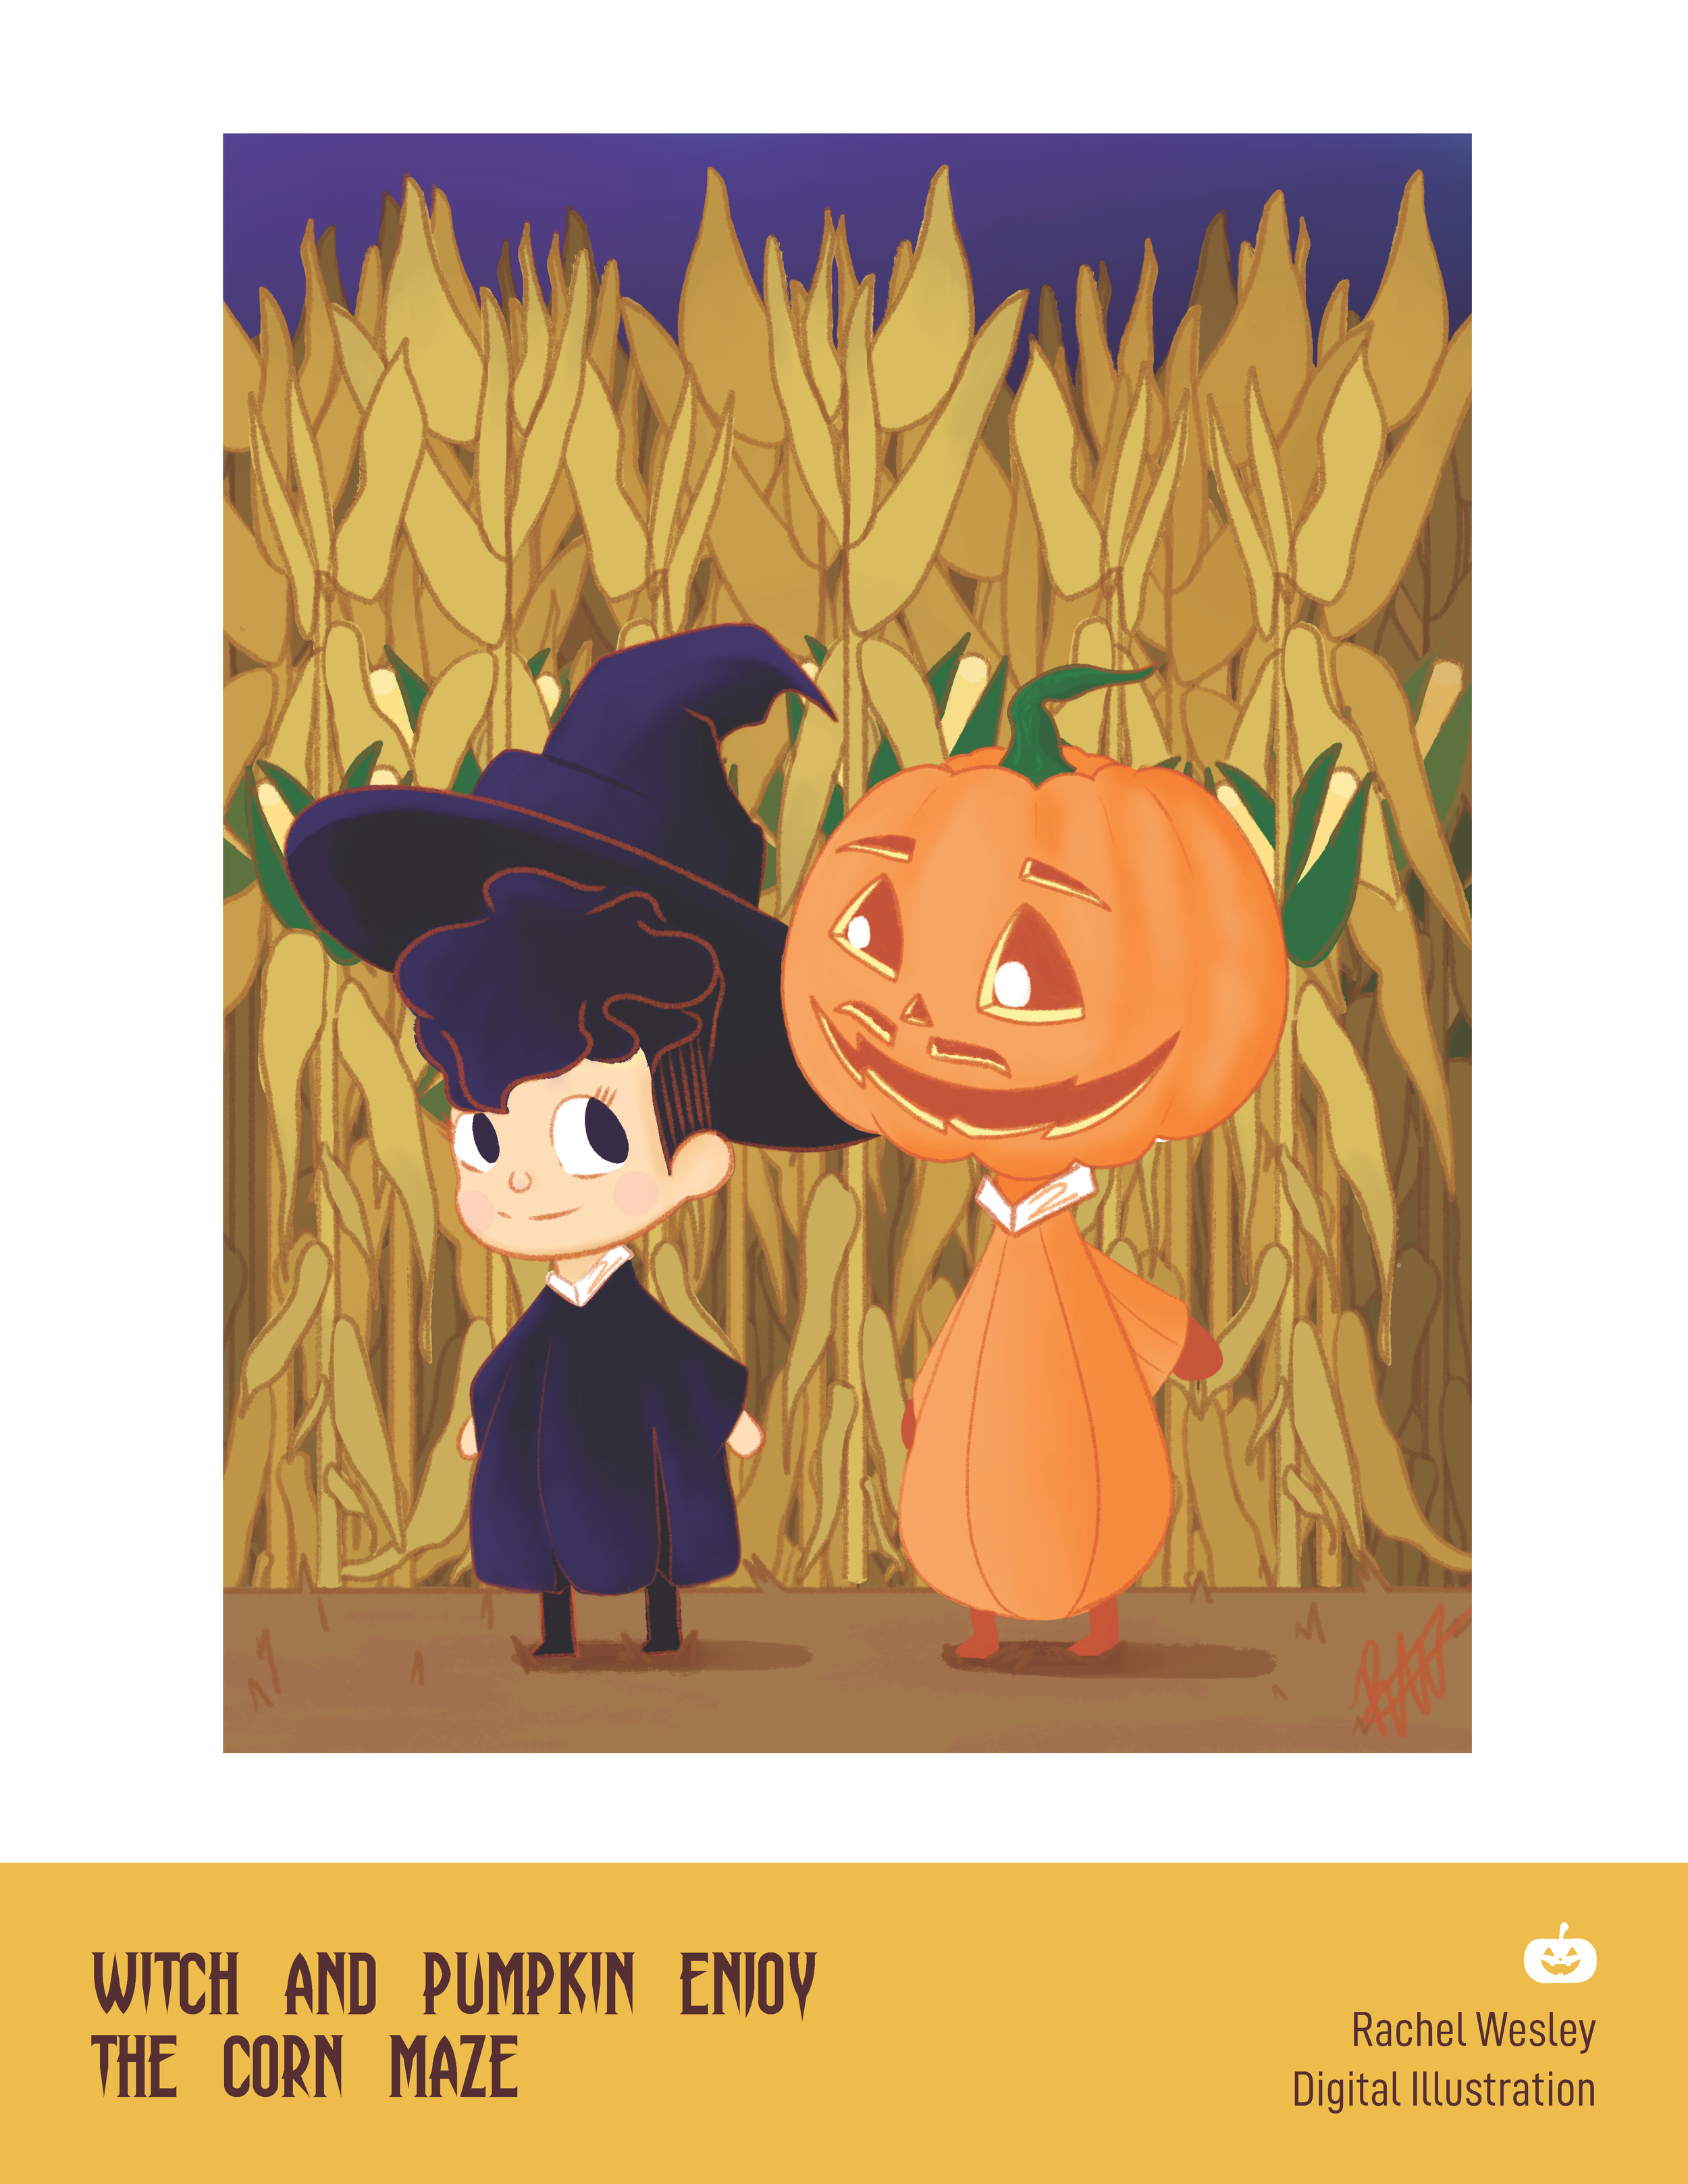 Witch and Pumpkin Enjoying the Corn Maze by Rachel Wesley